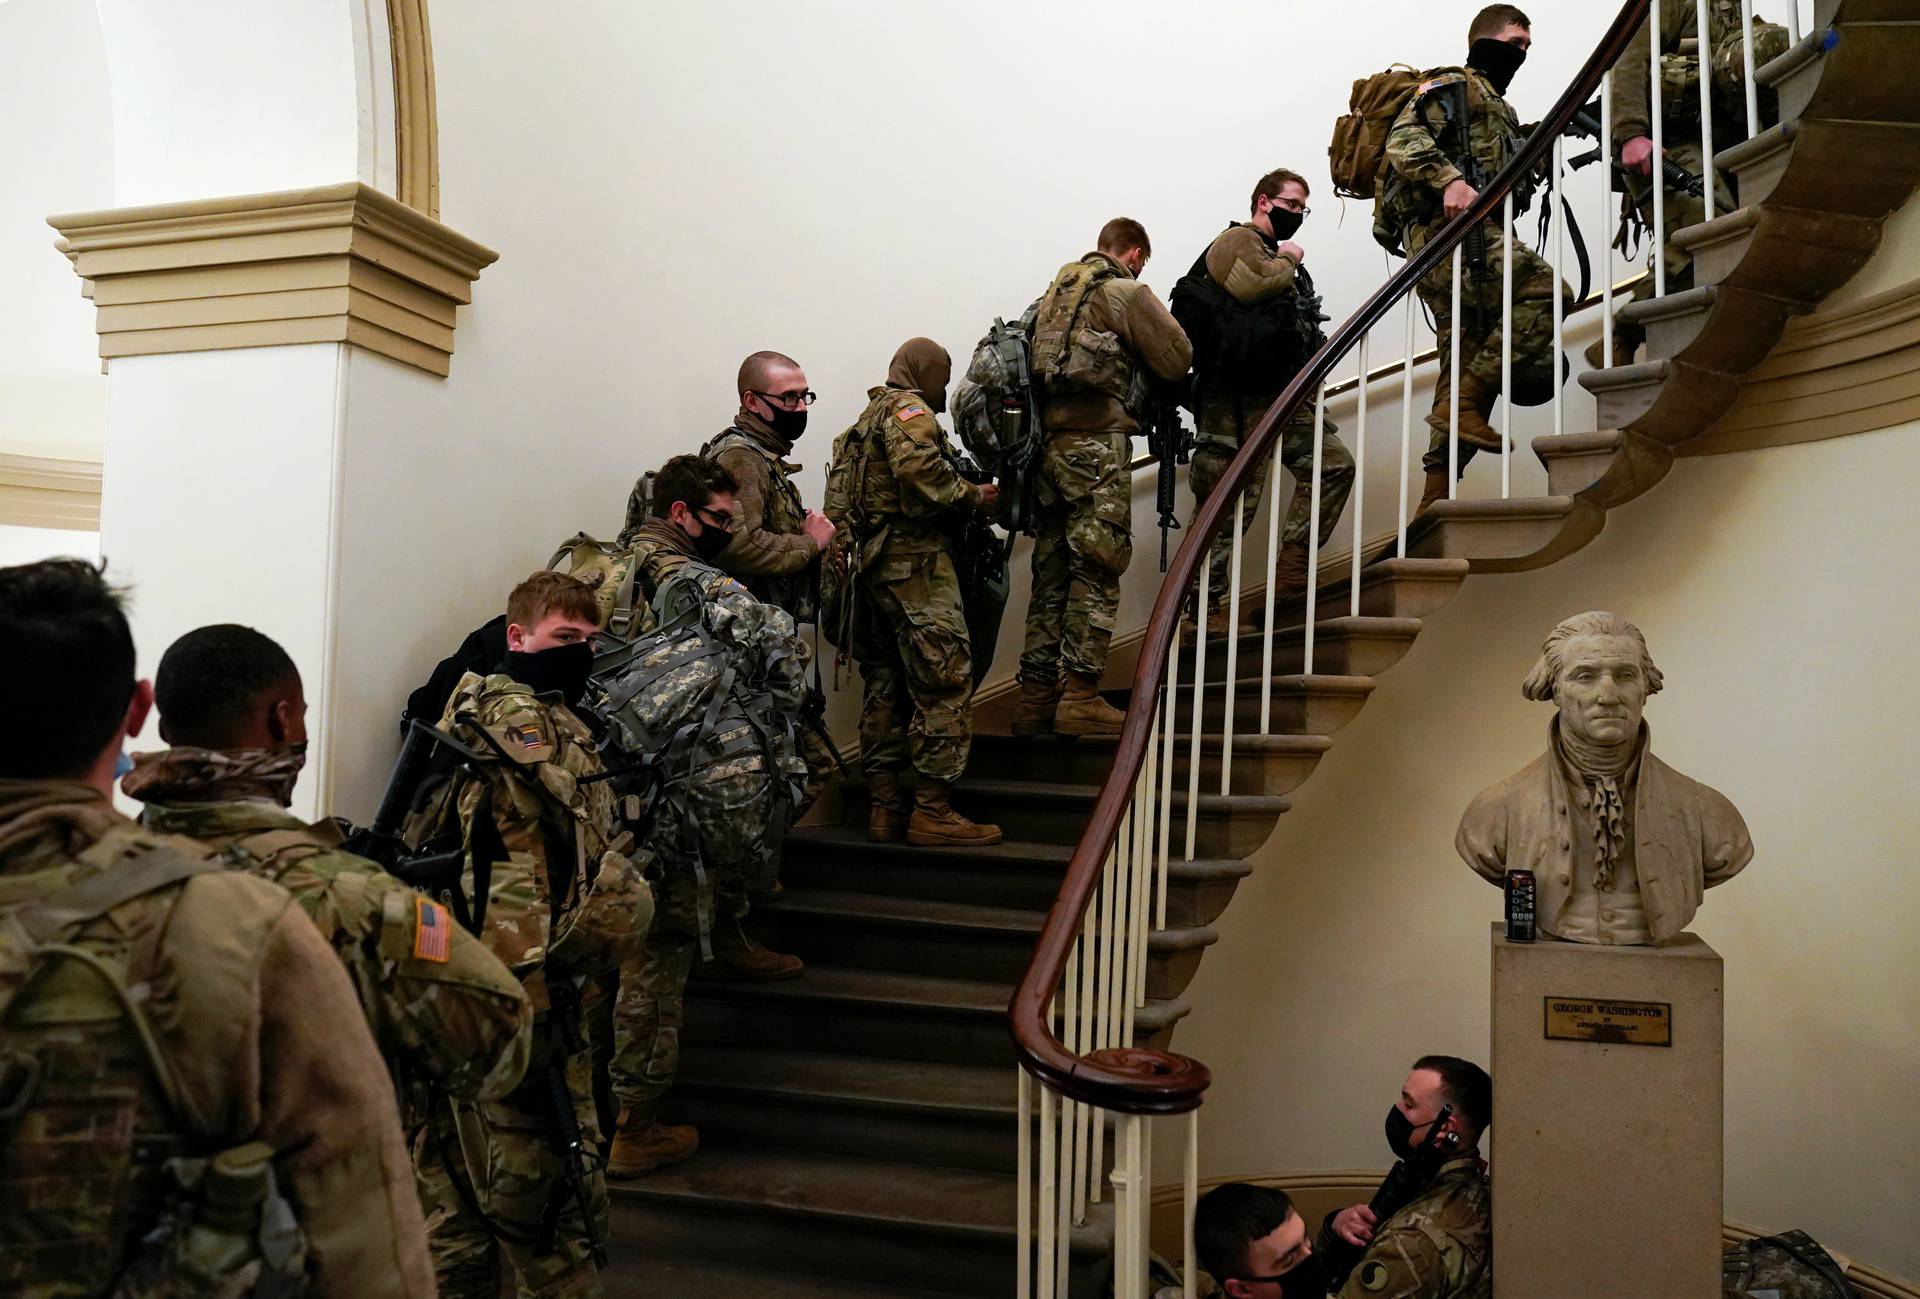 National Guard members gather at the U.S. Capitol in Washington